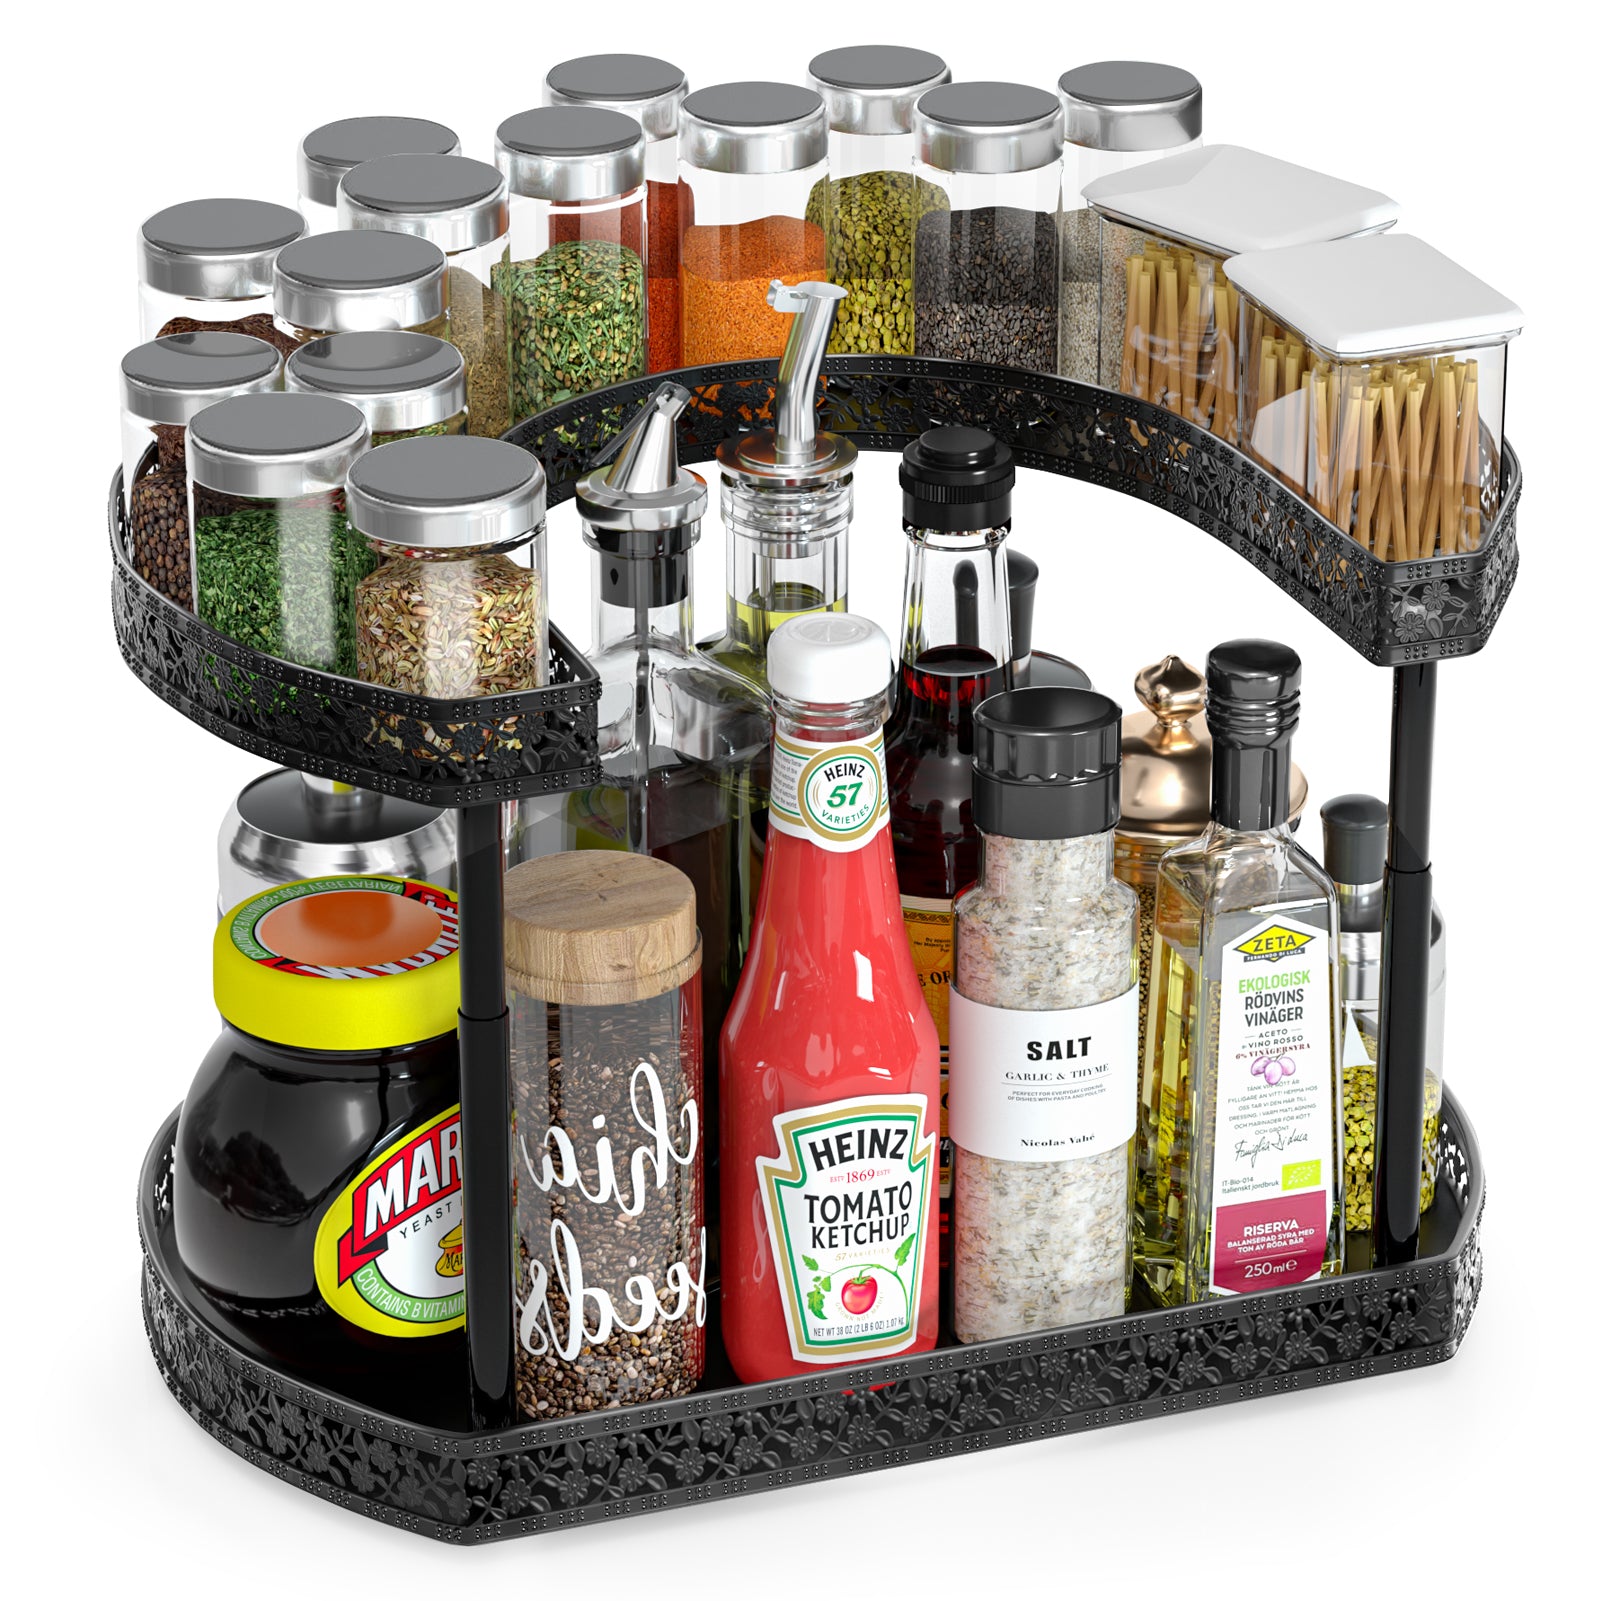 Multifunctional Rotating Kitchen Cabinet Spice Rack Single/Double Layer  Plastic Slide Cupboard Organizer Tray for Seasoning Herb